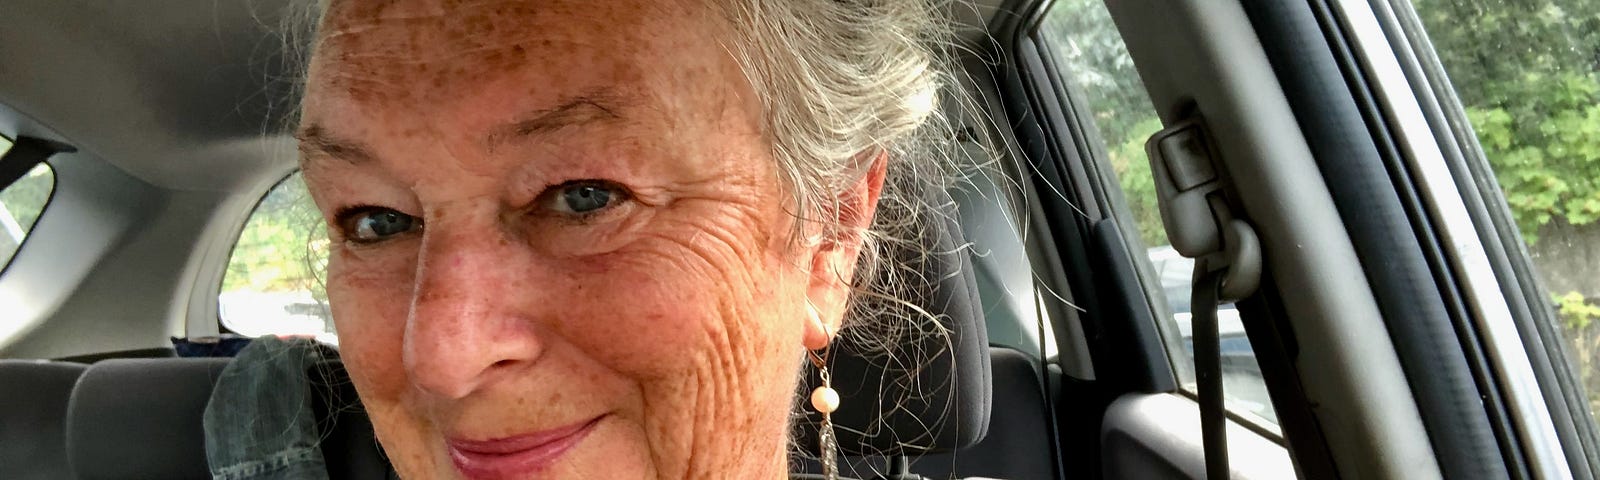 An older woman sits in a car. She is smiling at the camera. She has grey hair and many wrinkles on her face and neck